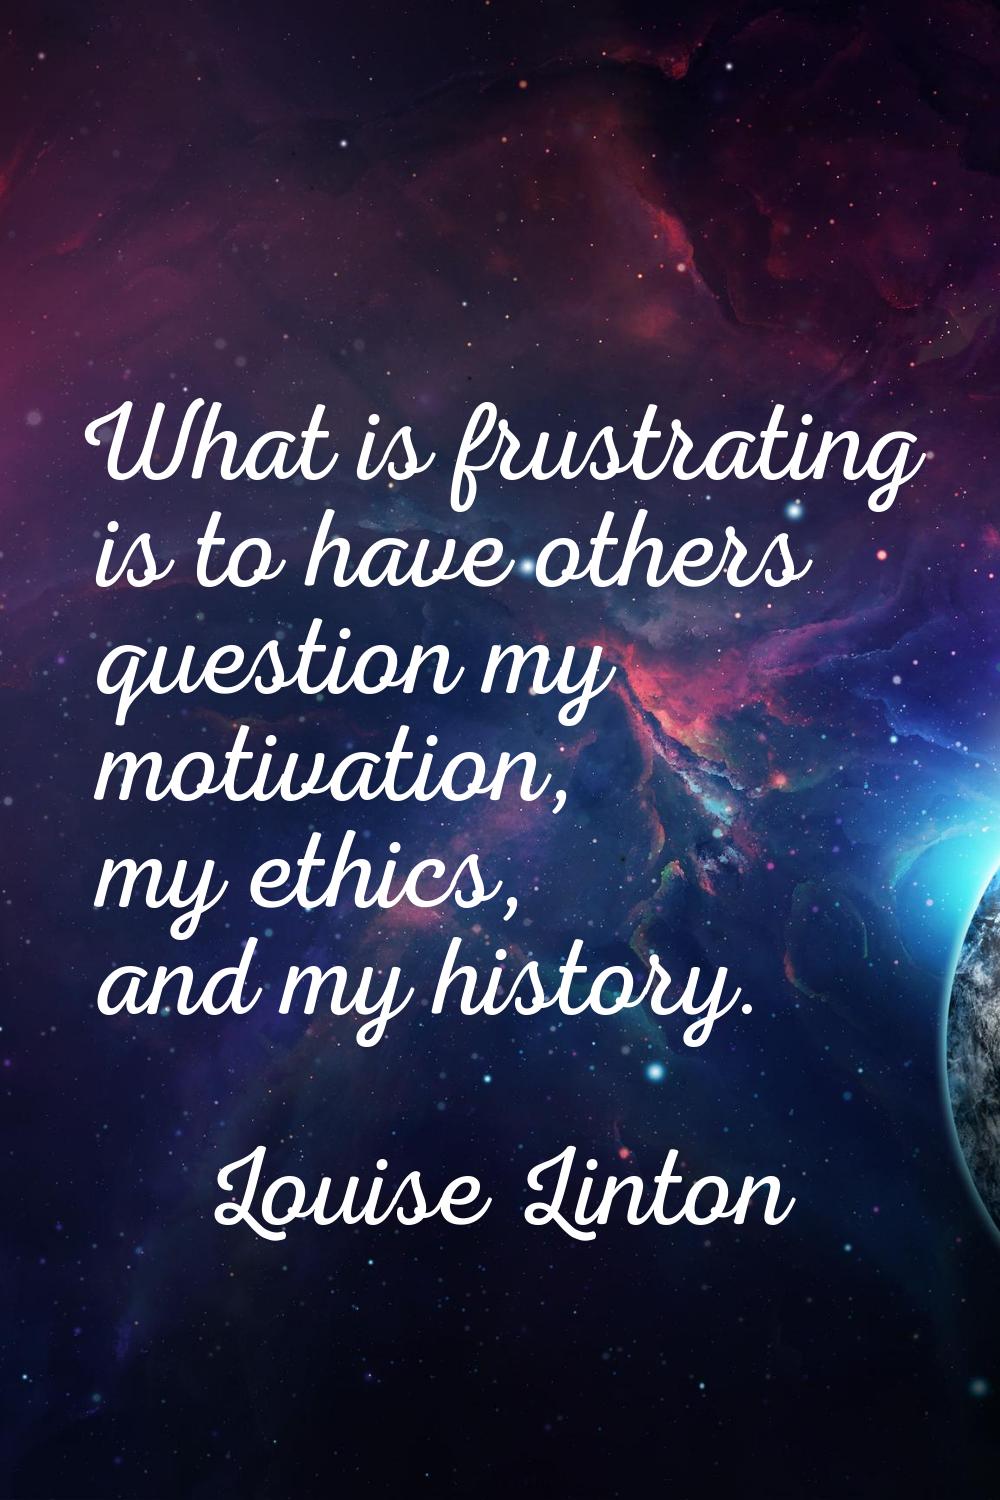 What is frustrating is to have others question my motivation, my ethics, and my history.